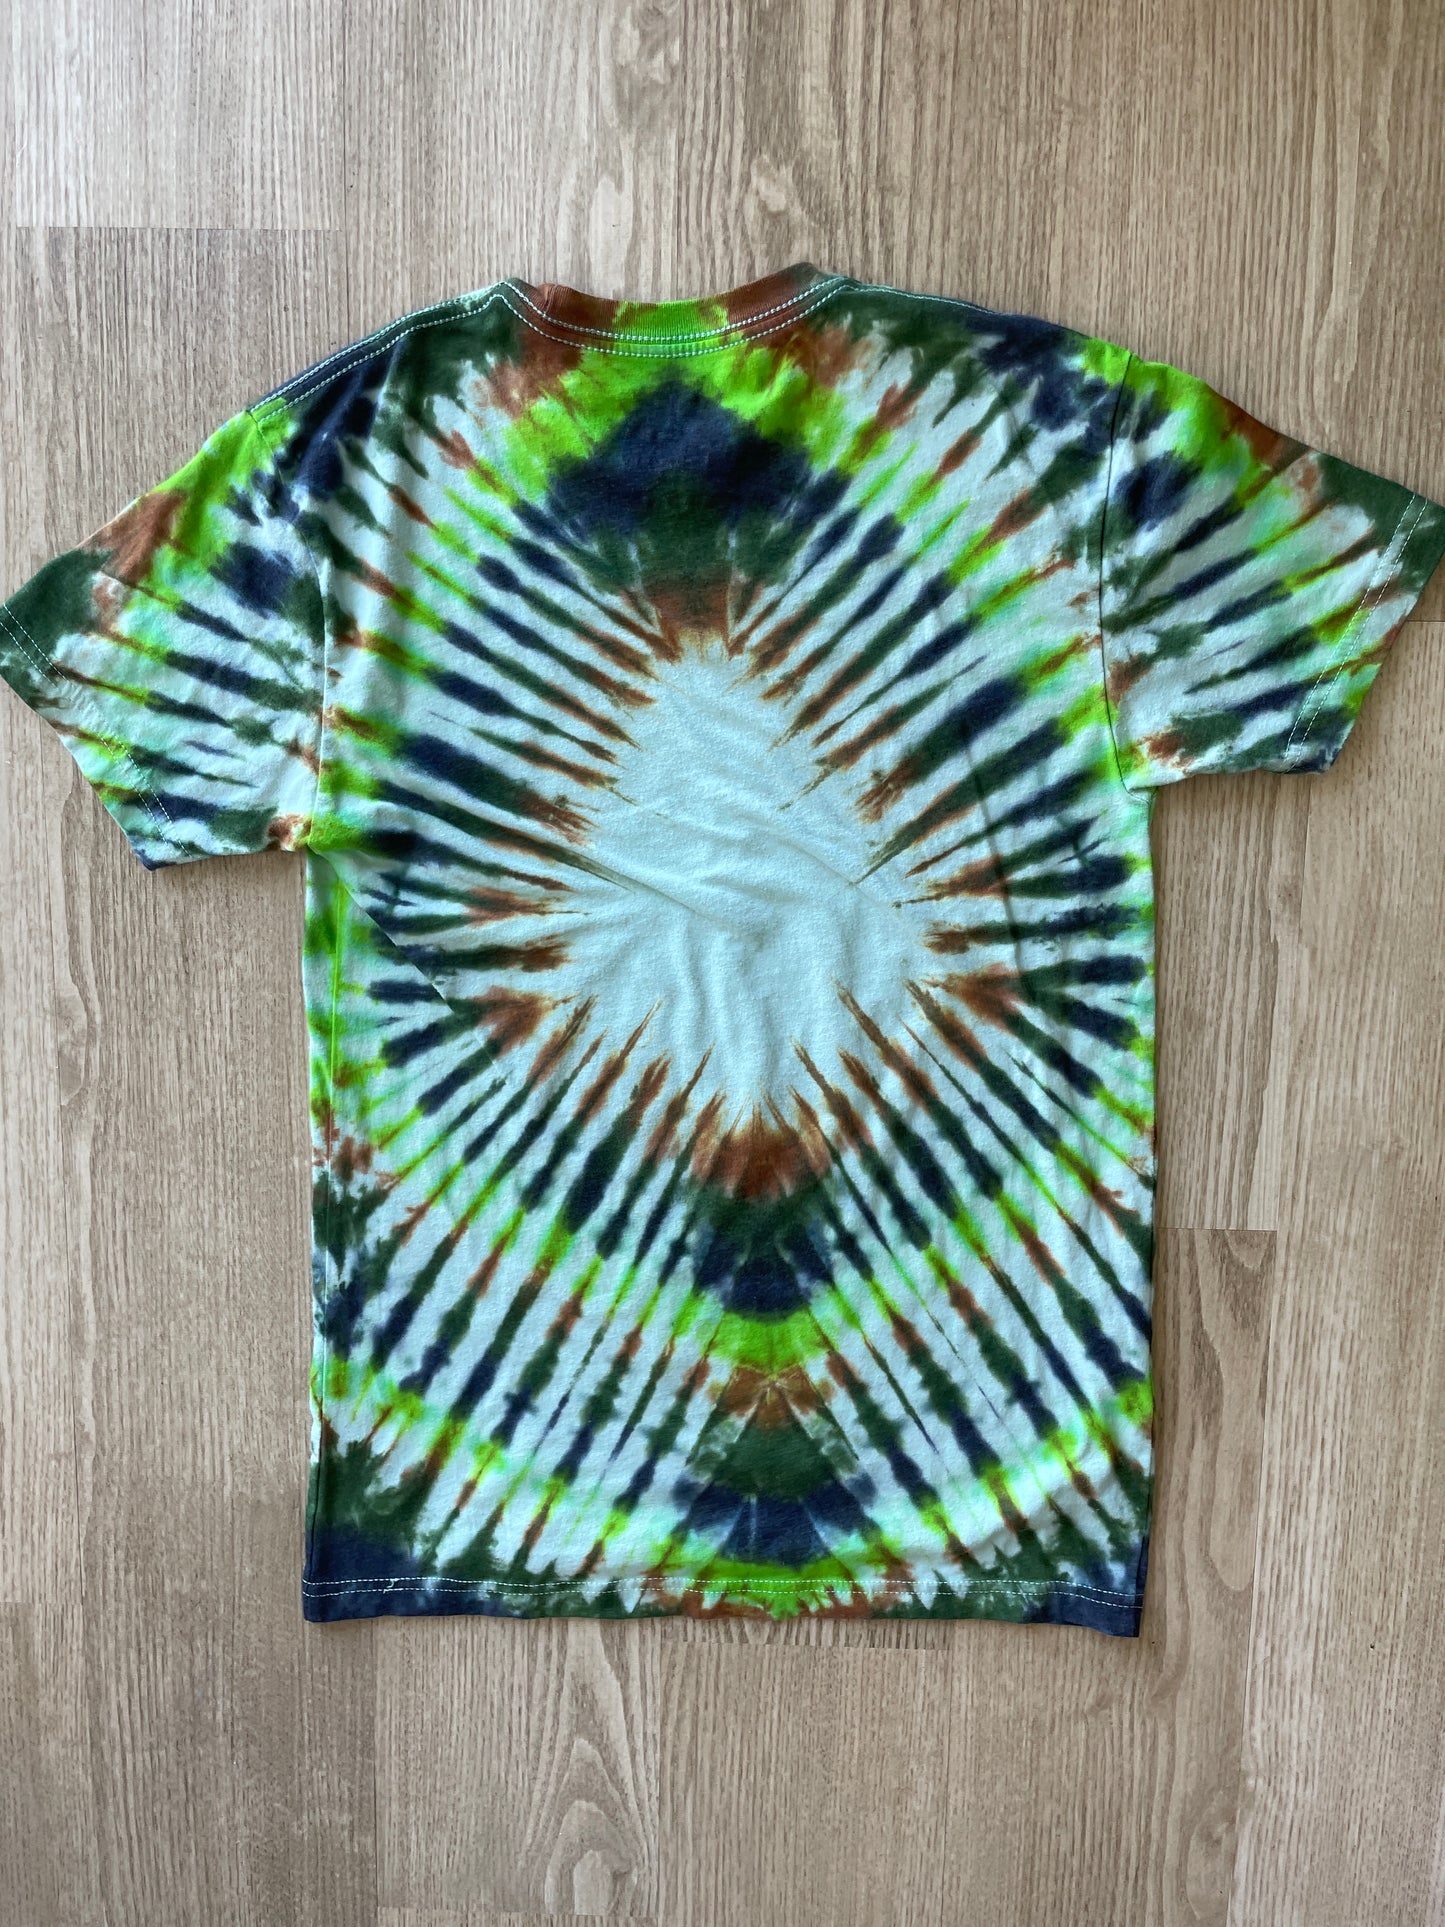 XS Men’s Wild Lucille Trigger Warning Handmade Tie Dye T-Shirt | One-Of-a-Kind Green and Brown Pleated Short Sleeve